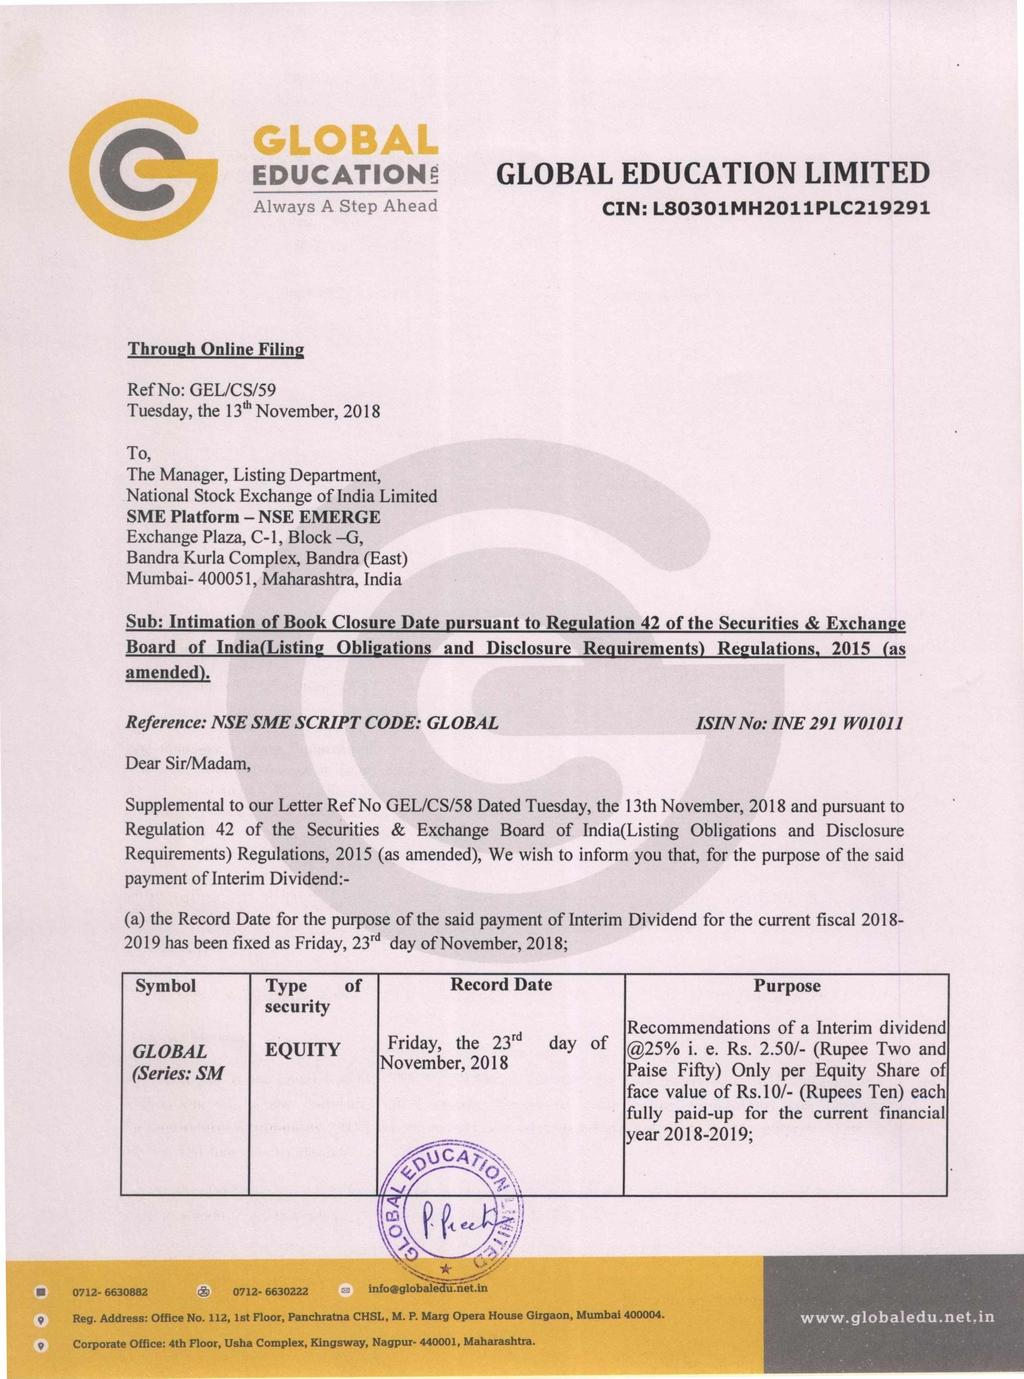 EDUCATION Always A Step Ahead GLOBAL EDUCATION LIMITED CIN: L80301MH2011PLC219291 Through Online Filing Ref No: GEL/CS/59 Tuesday, the 13th November, 2018 To, The Manager, Listing Department,